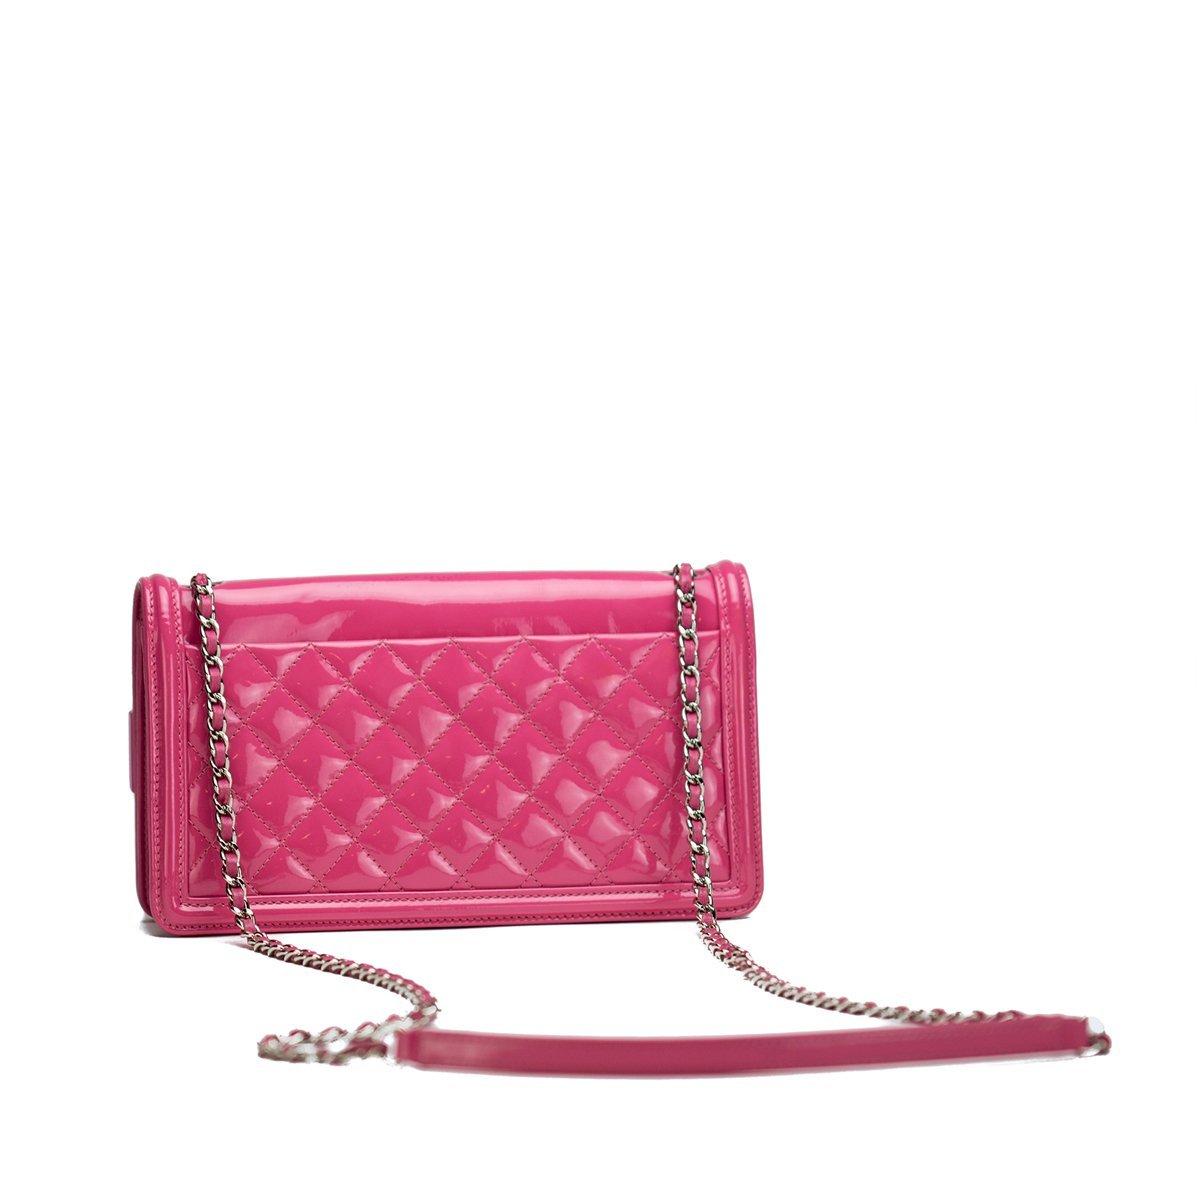 Chanel Hot Pink Ombre Patent Leather Brick Flap Crossbody Convertible ...